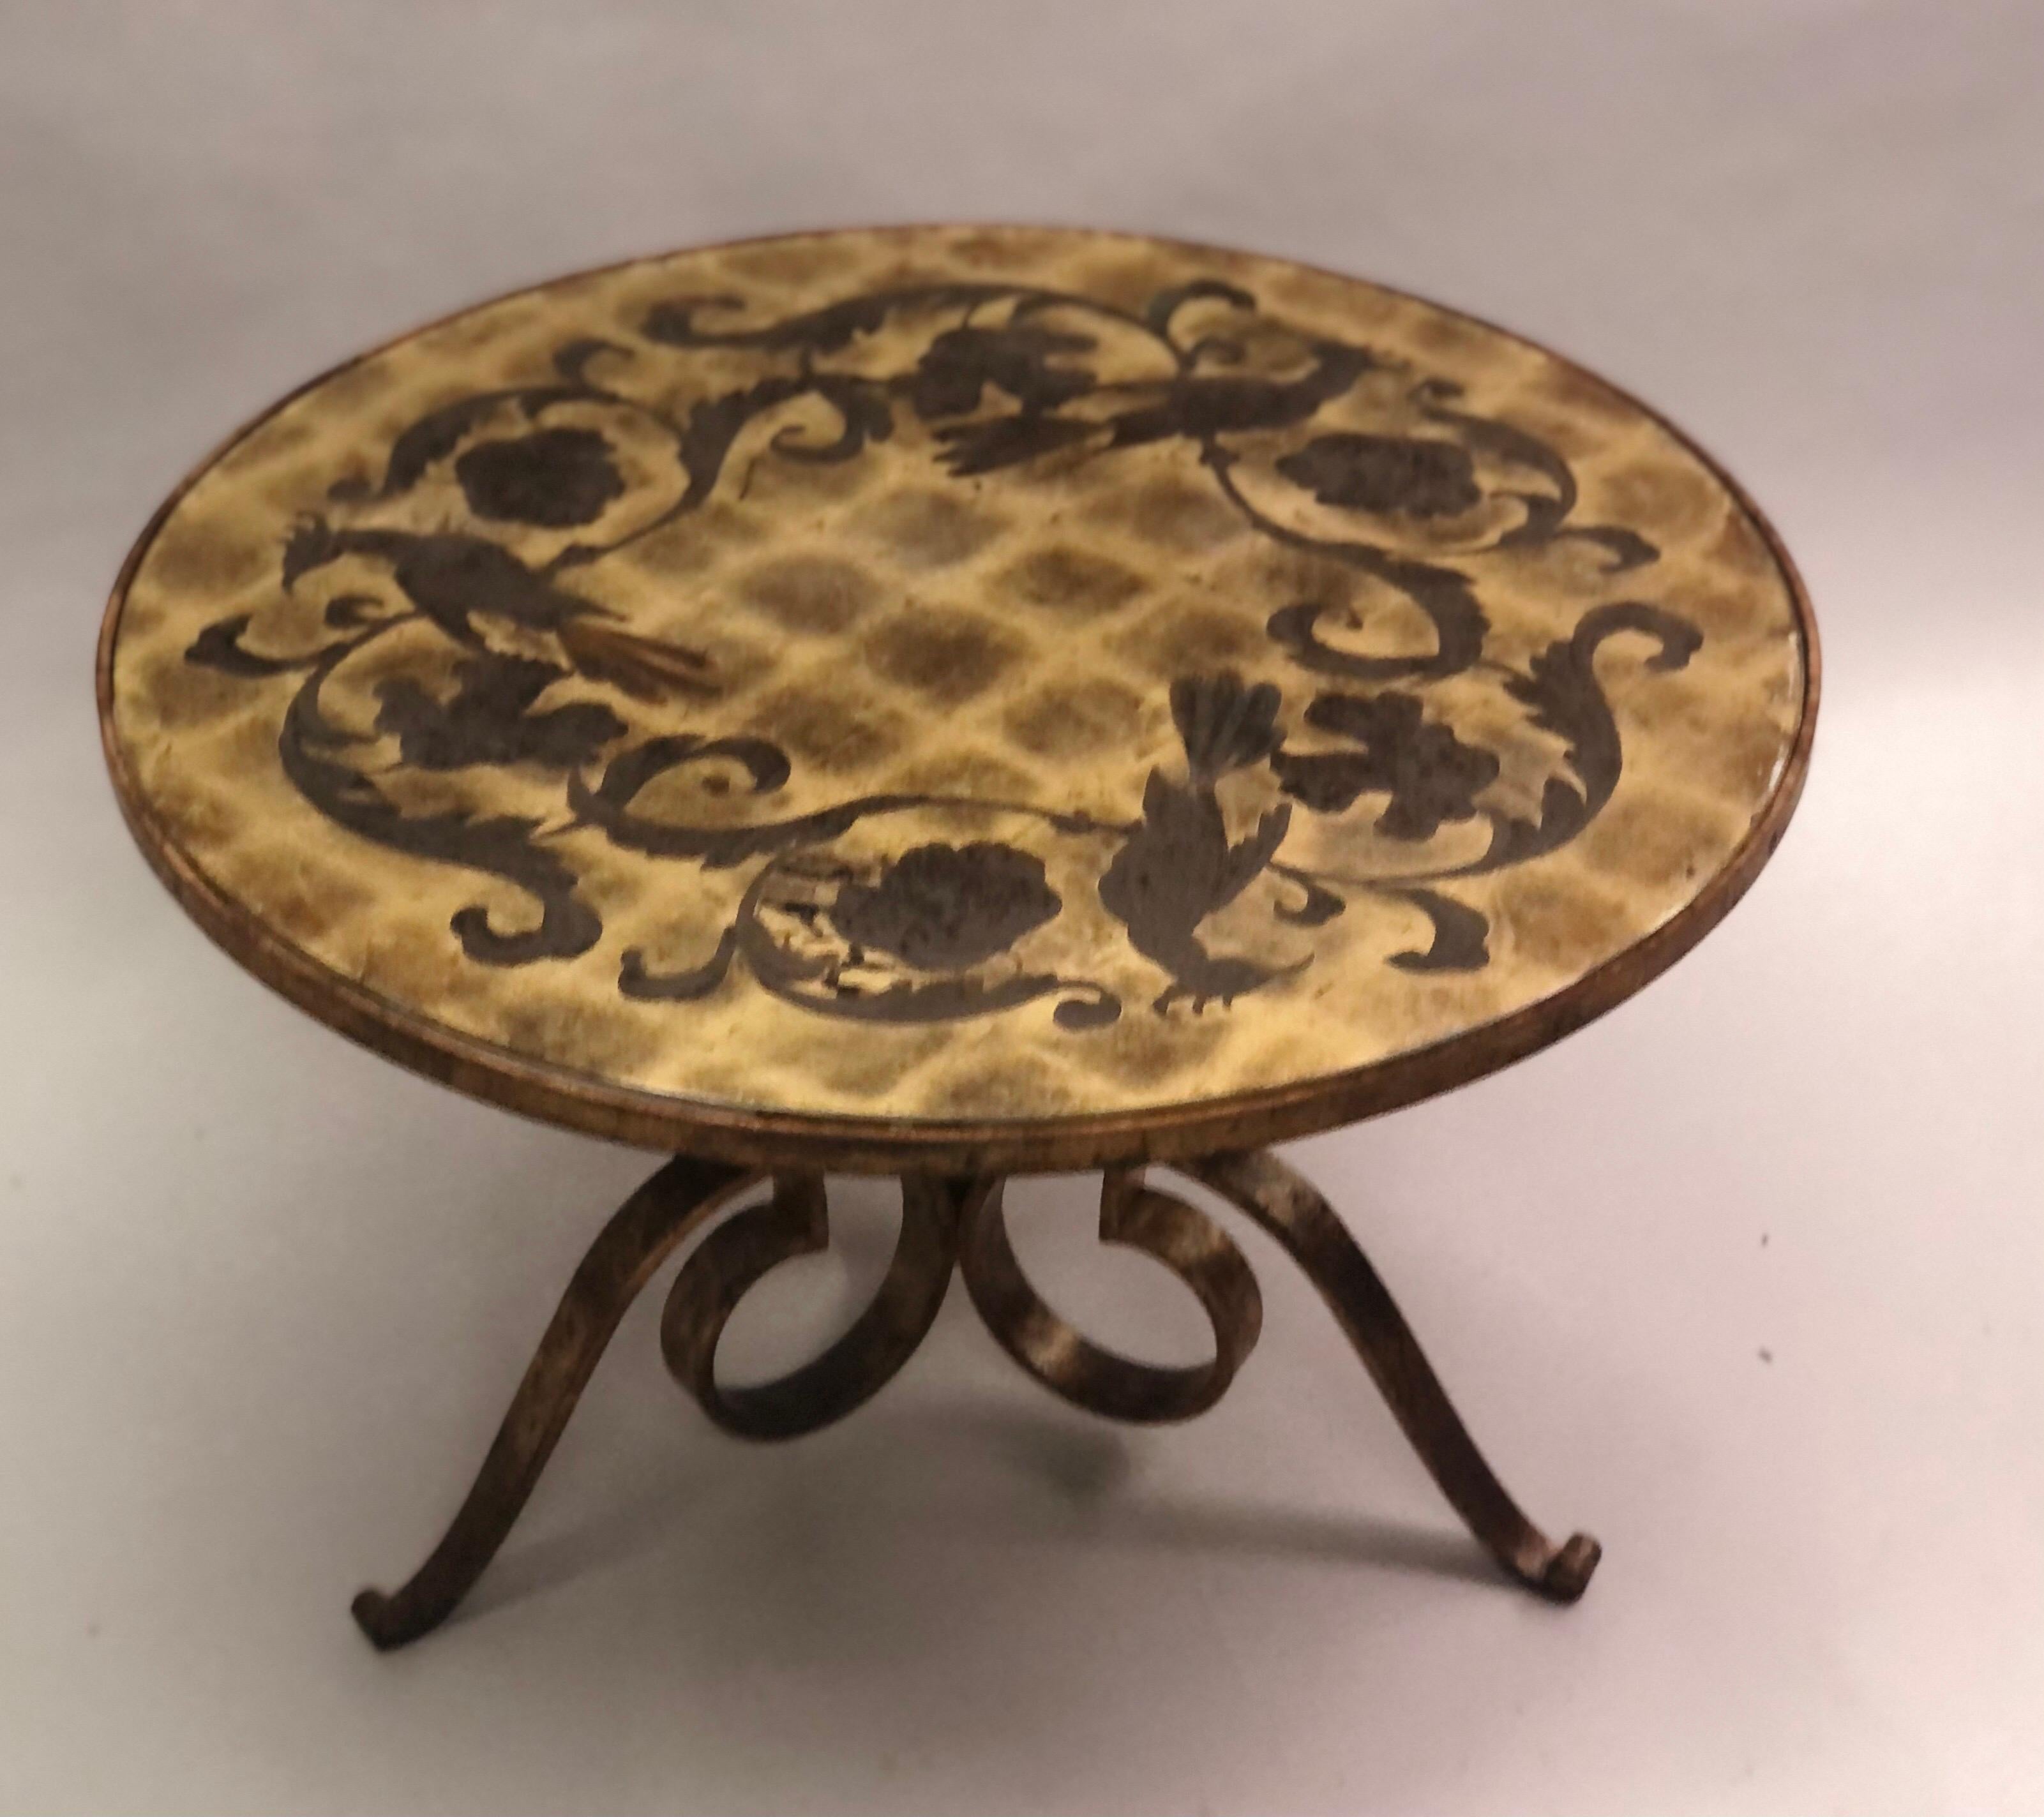 French Modern Neoclassical Gilt Wrought Iron Coffee / Side Table by Rene Drouet In Good Condition For Sale In New York, NY